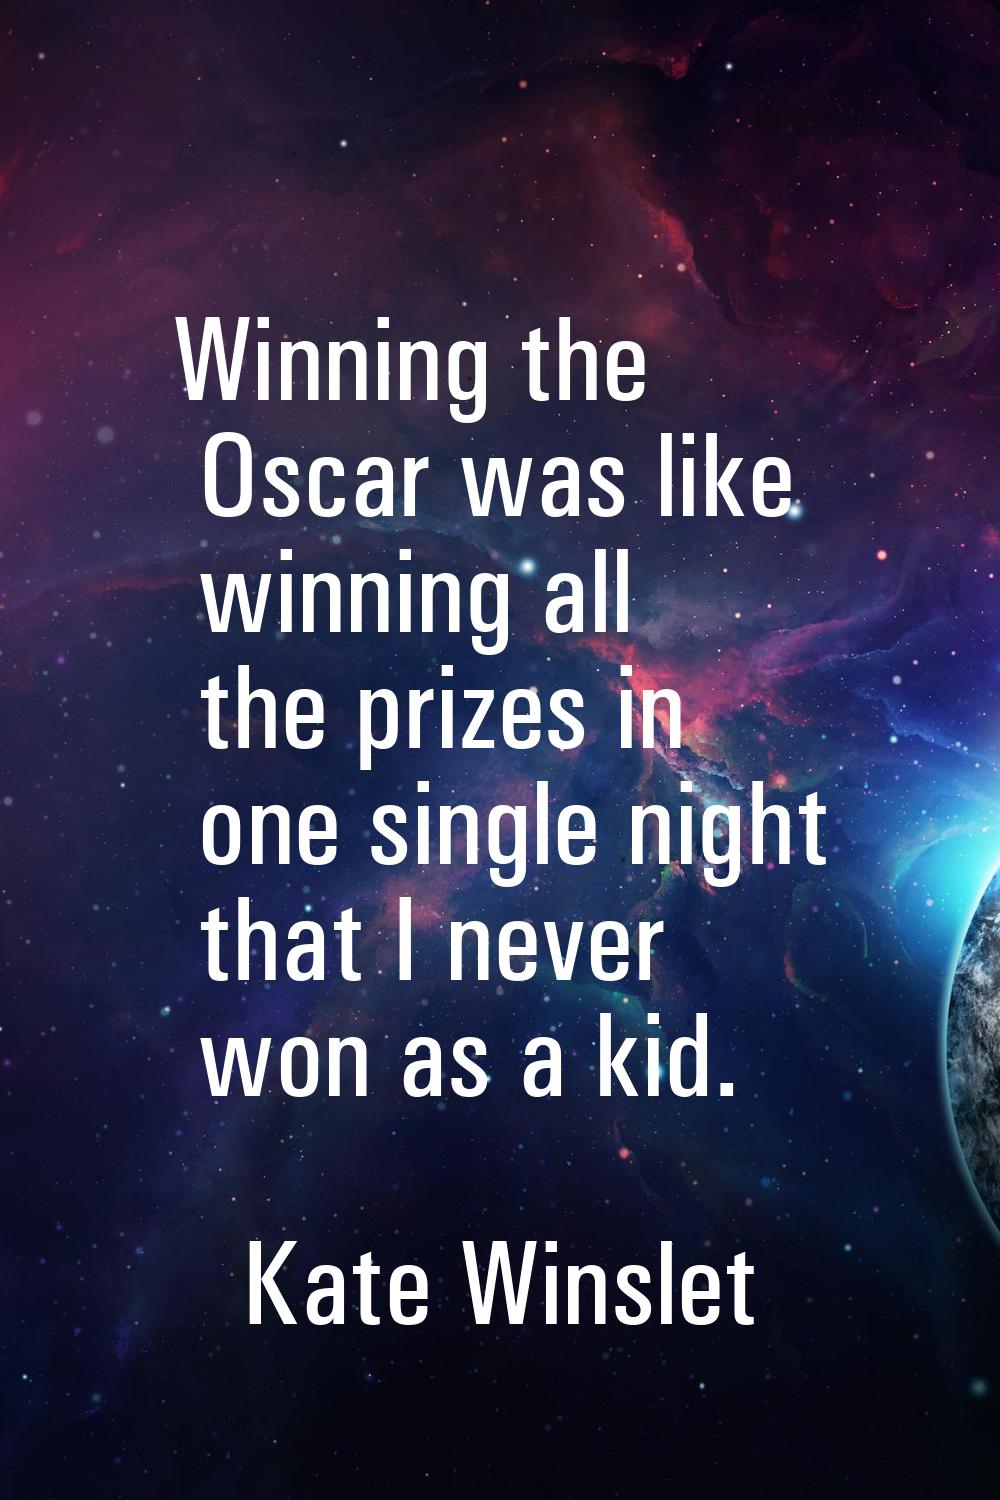 Winning the Oscar was like winning all the prizes in one single night that I never won as a kid.